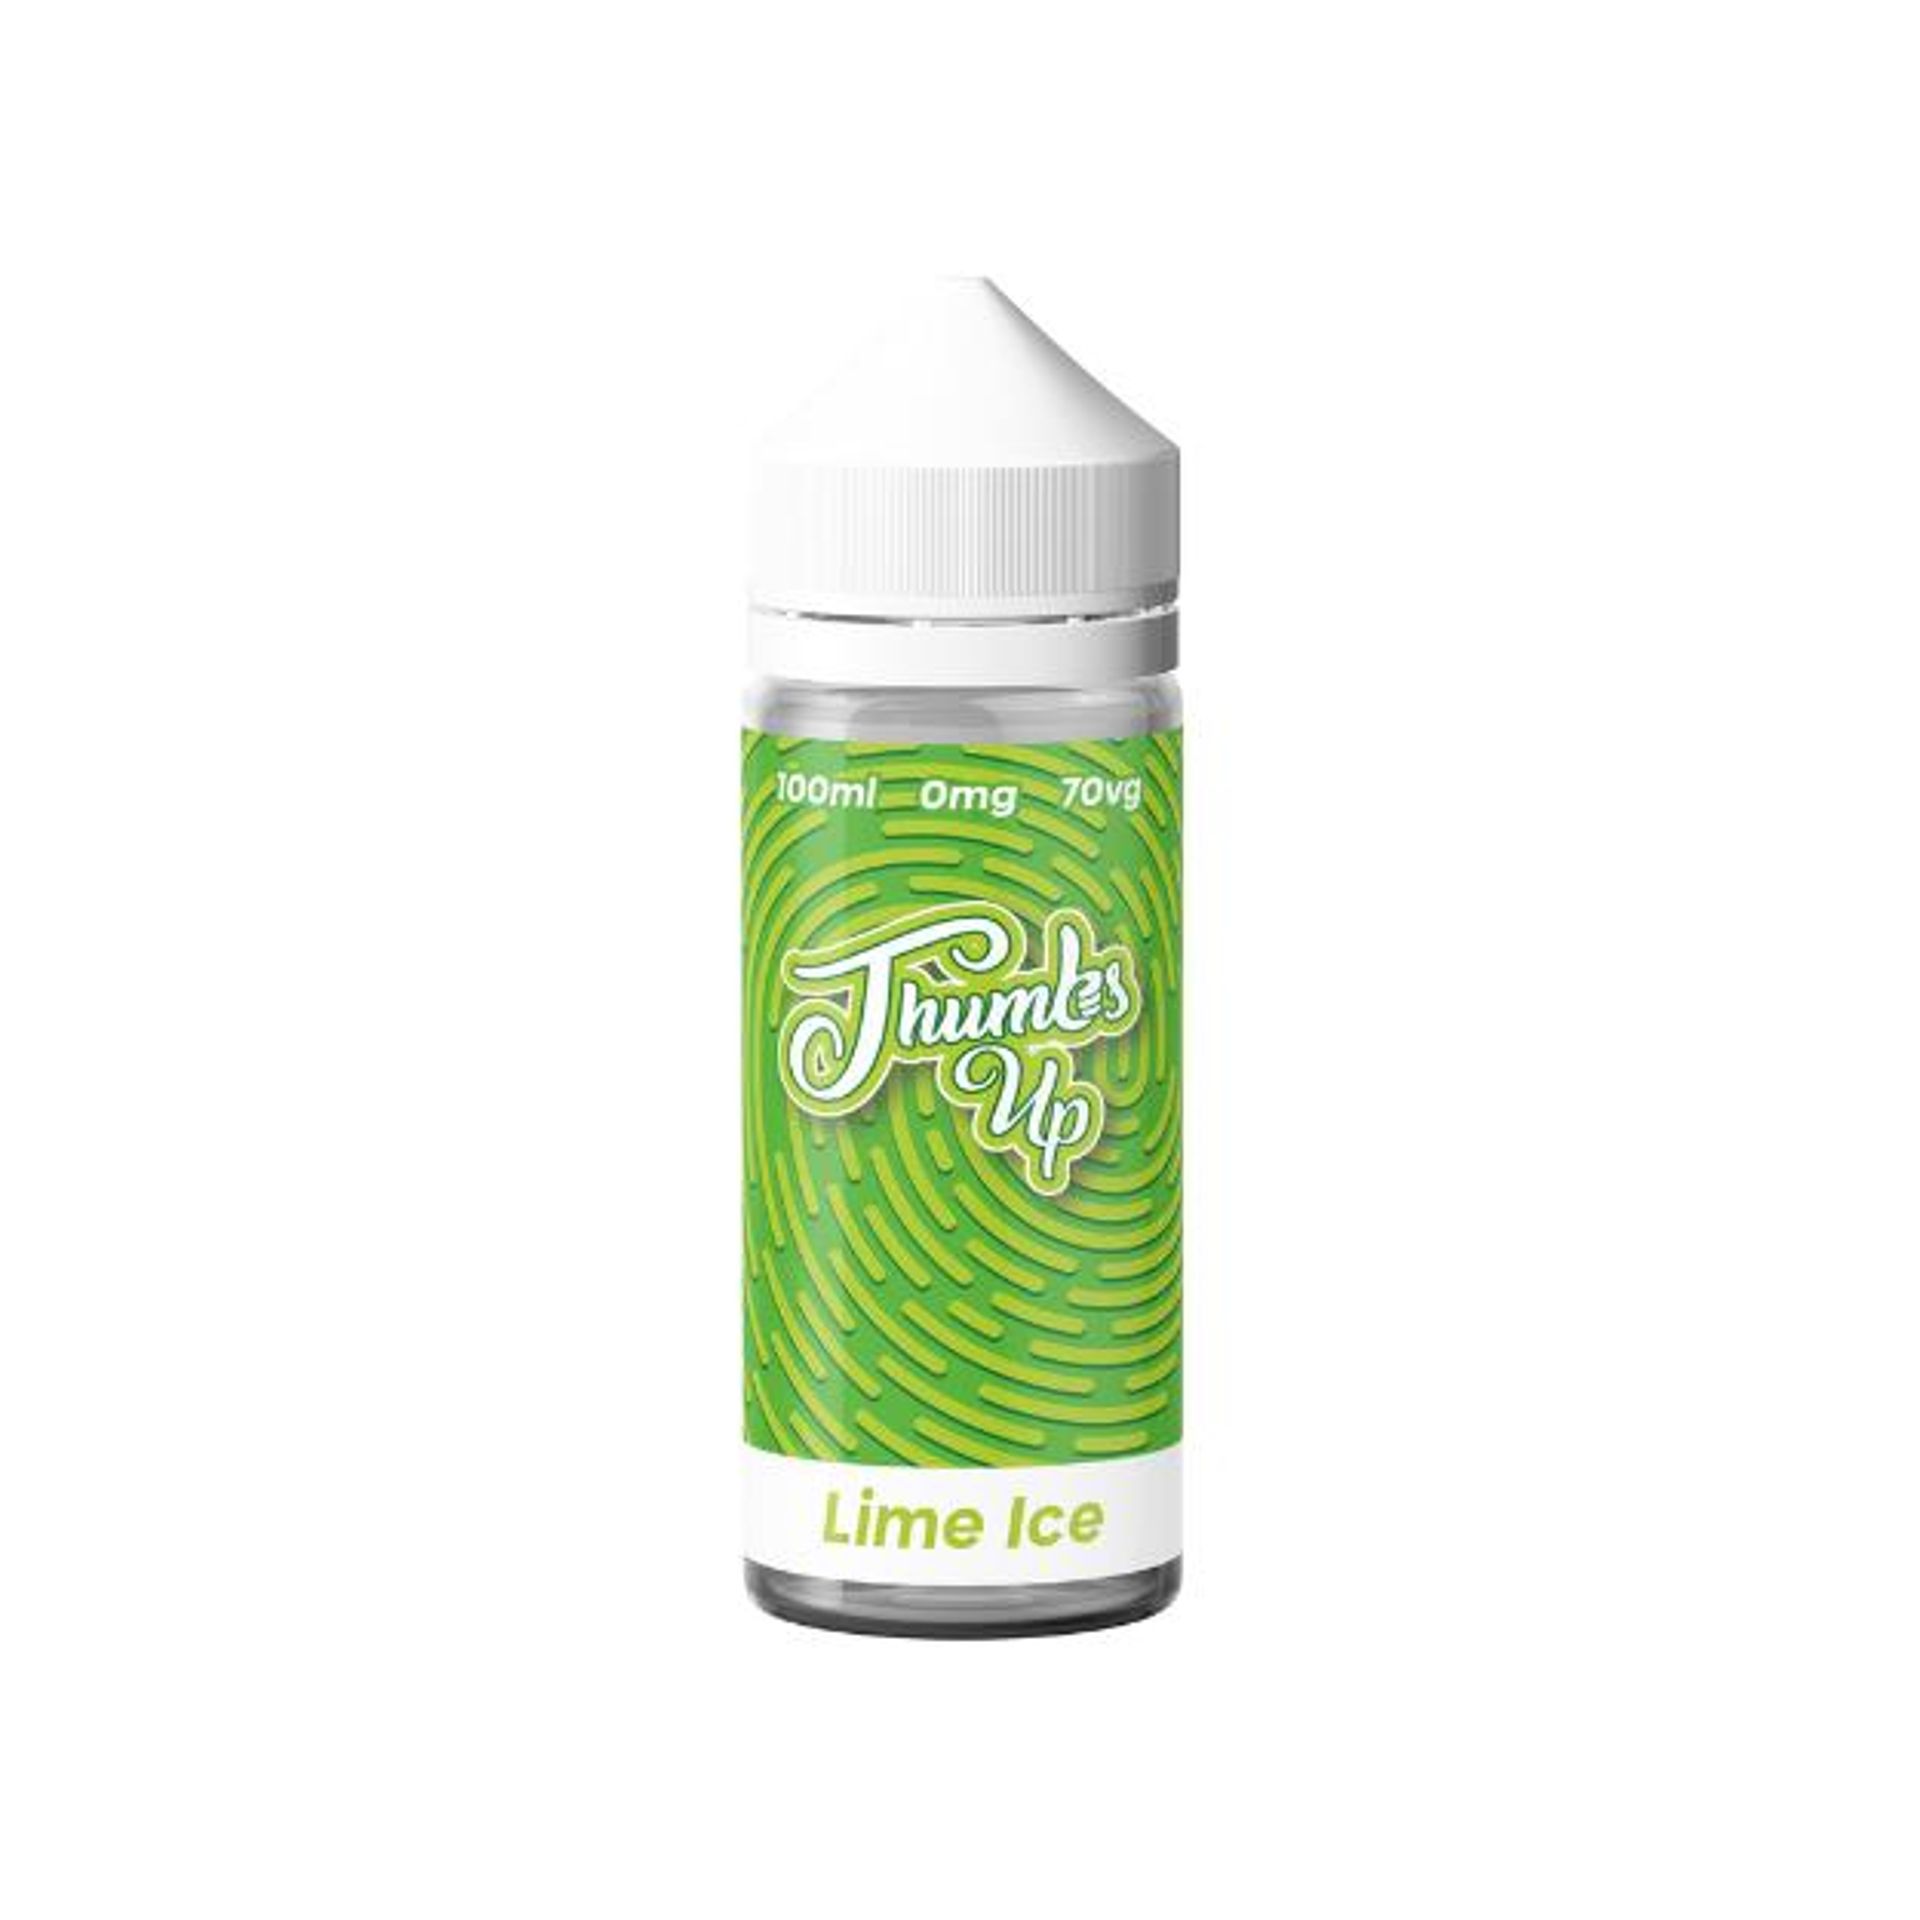 Image of Lime Ice by Thumbs Up